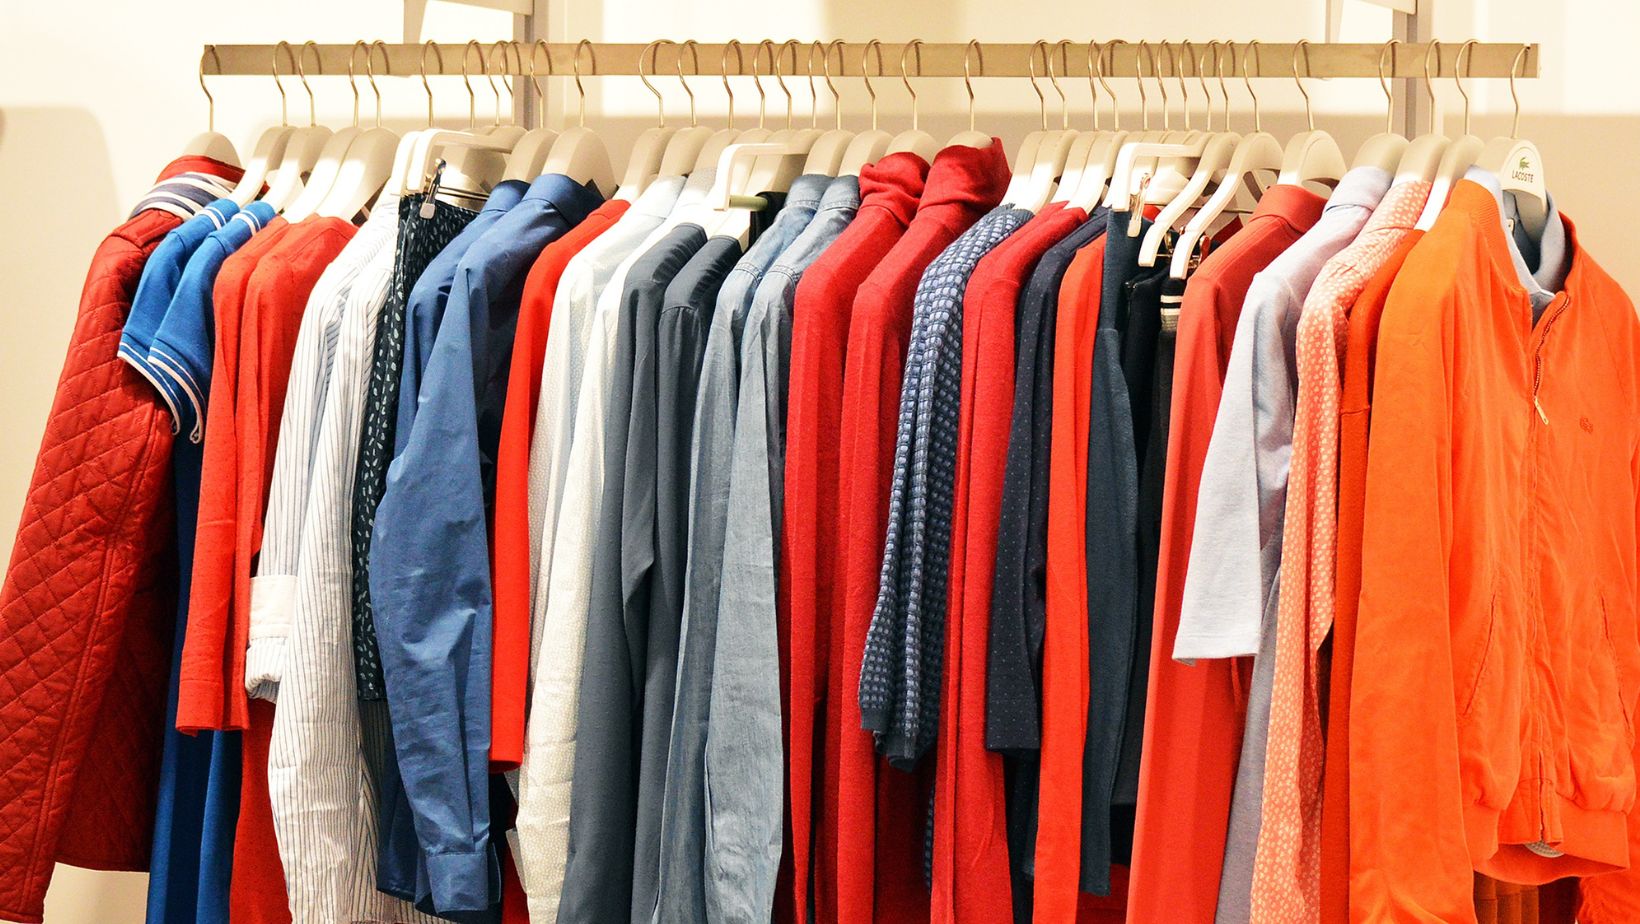 Why are Gold Clothing Racks Becoming Trendy?